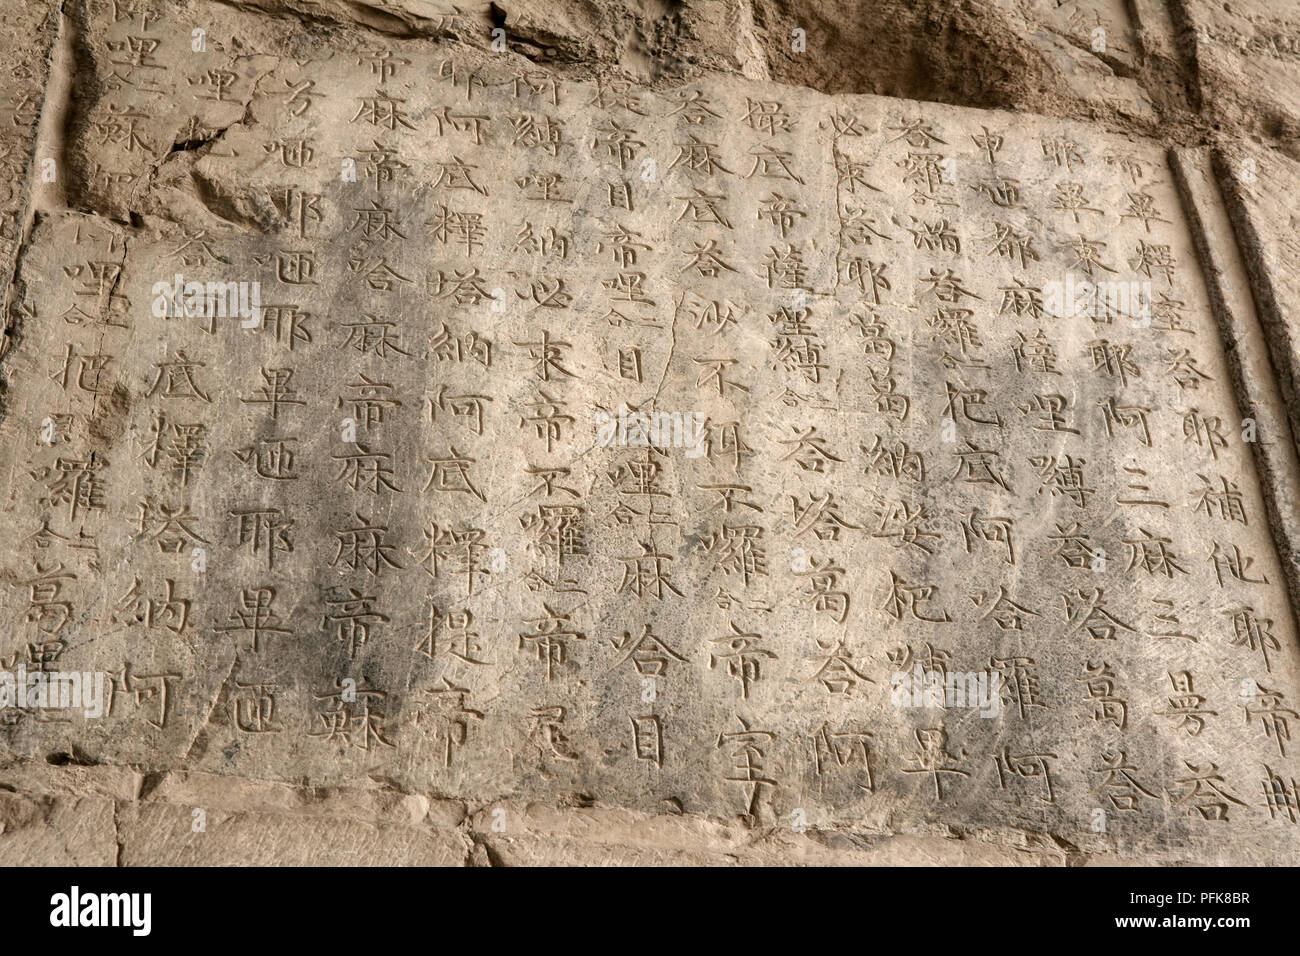 China, Juyongguan, Great Wall of China, Buddhist writings in Chinese script carved into wall, close-up Stock Photo